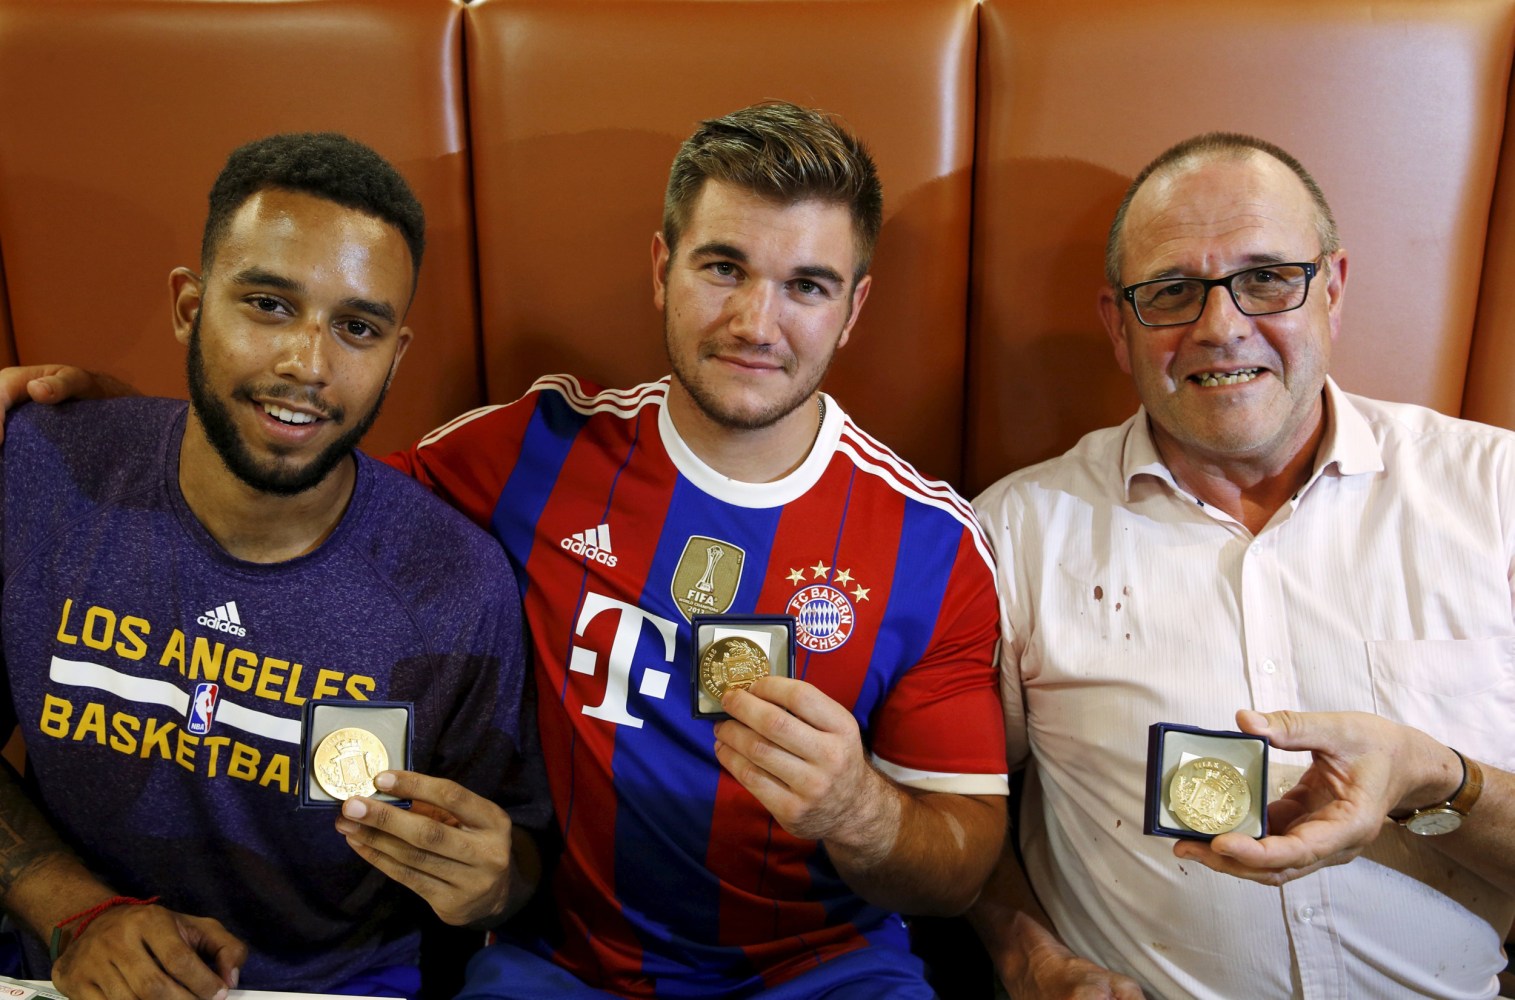 Anthony Sadler, from Pittsburg, California, Aleck Sharlatos from Roseburg, Oregon, and Chris Norman, a British man living in France (L-R), three men who helped to disarm an attacker on a train from Amsterdam to France